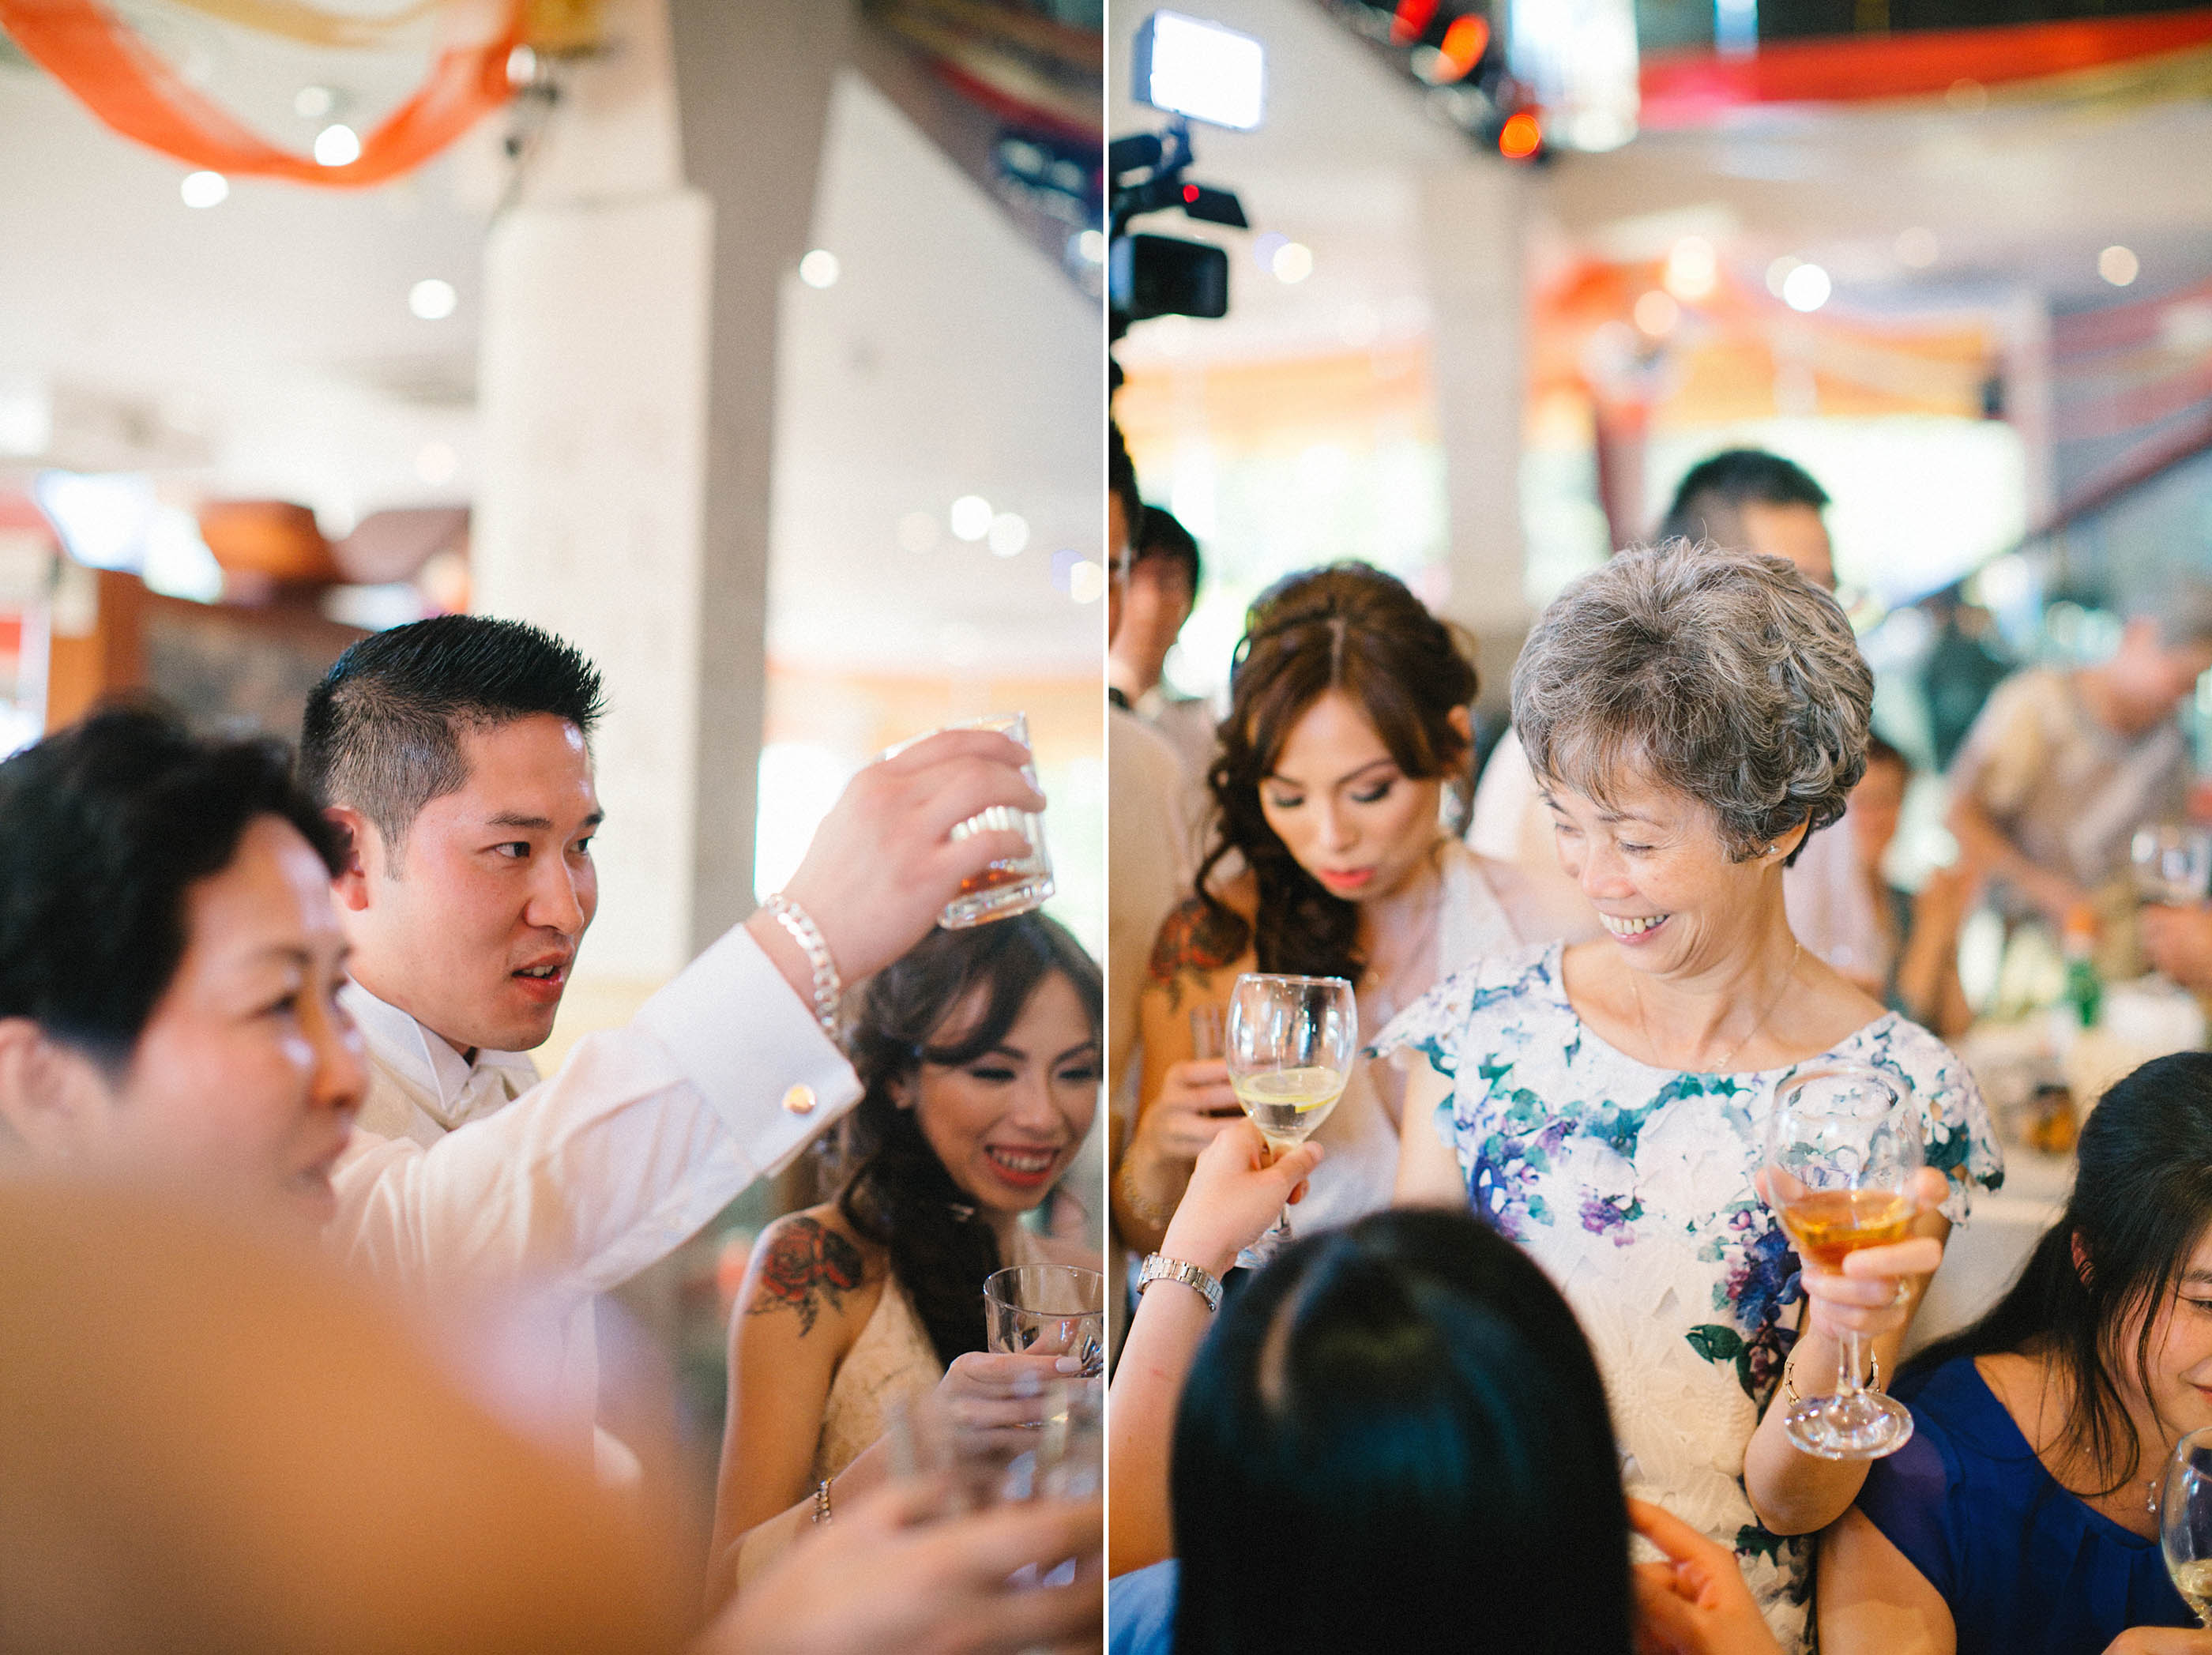 nicholas-lau-photo-photography-fine-art-film-wedding-london-asian-chinese-uk-mulitcultural-ceremony-reception-guests-toasting-mother-of-bride